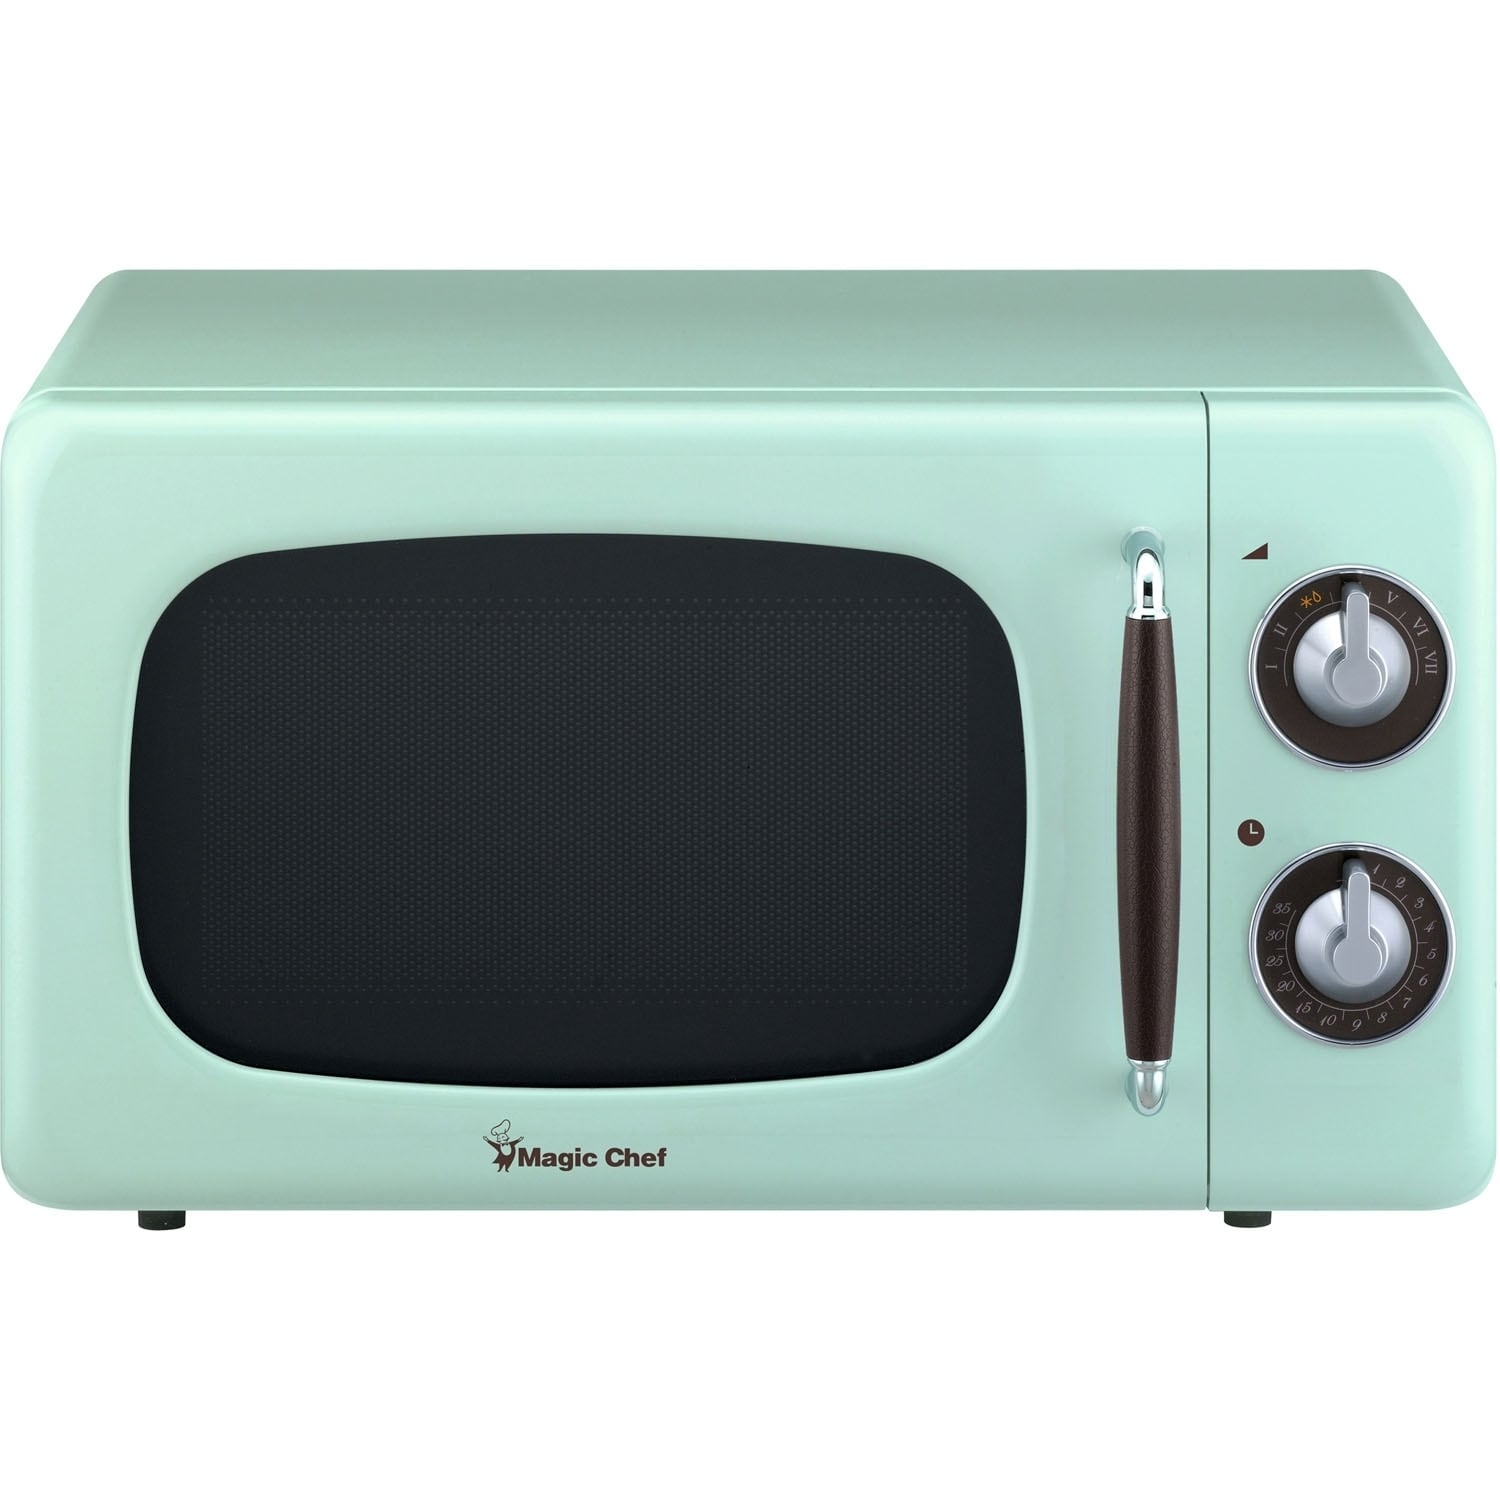  Nostalgia Retro Compact Countertop Microwave Oven - 0.7 Cu. Ft.  - 700-Watts with LED Digital Display - Child Lock - Easy Clean Interior -  Aqua : Home & Kitchen